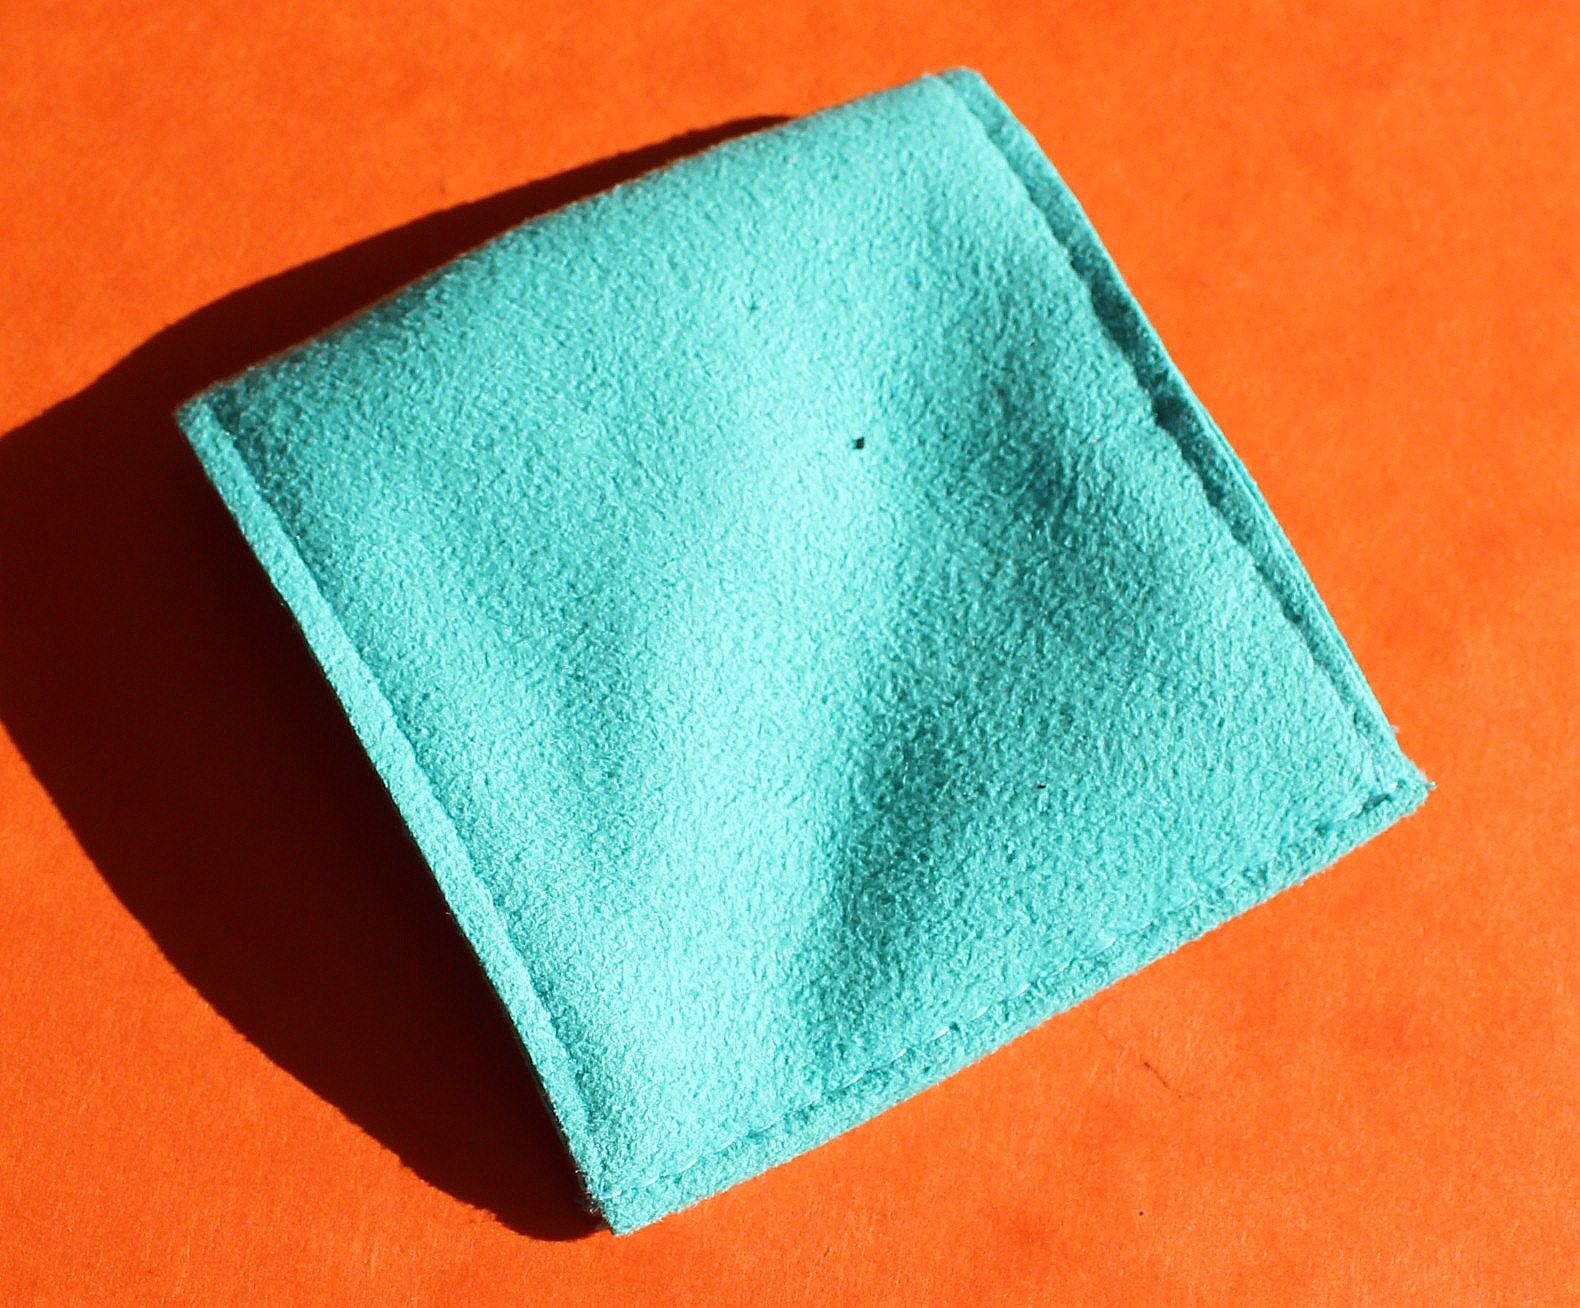 TIFFANY & Co TURQUOISE LUXURY SUEDE ENVELOPE SNAP